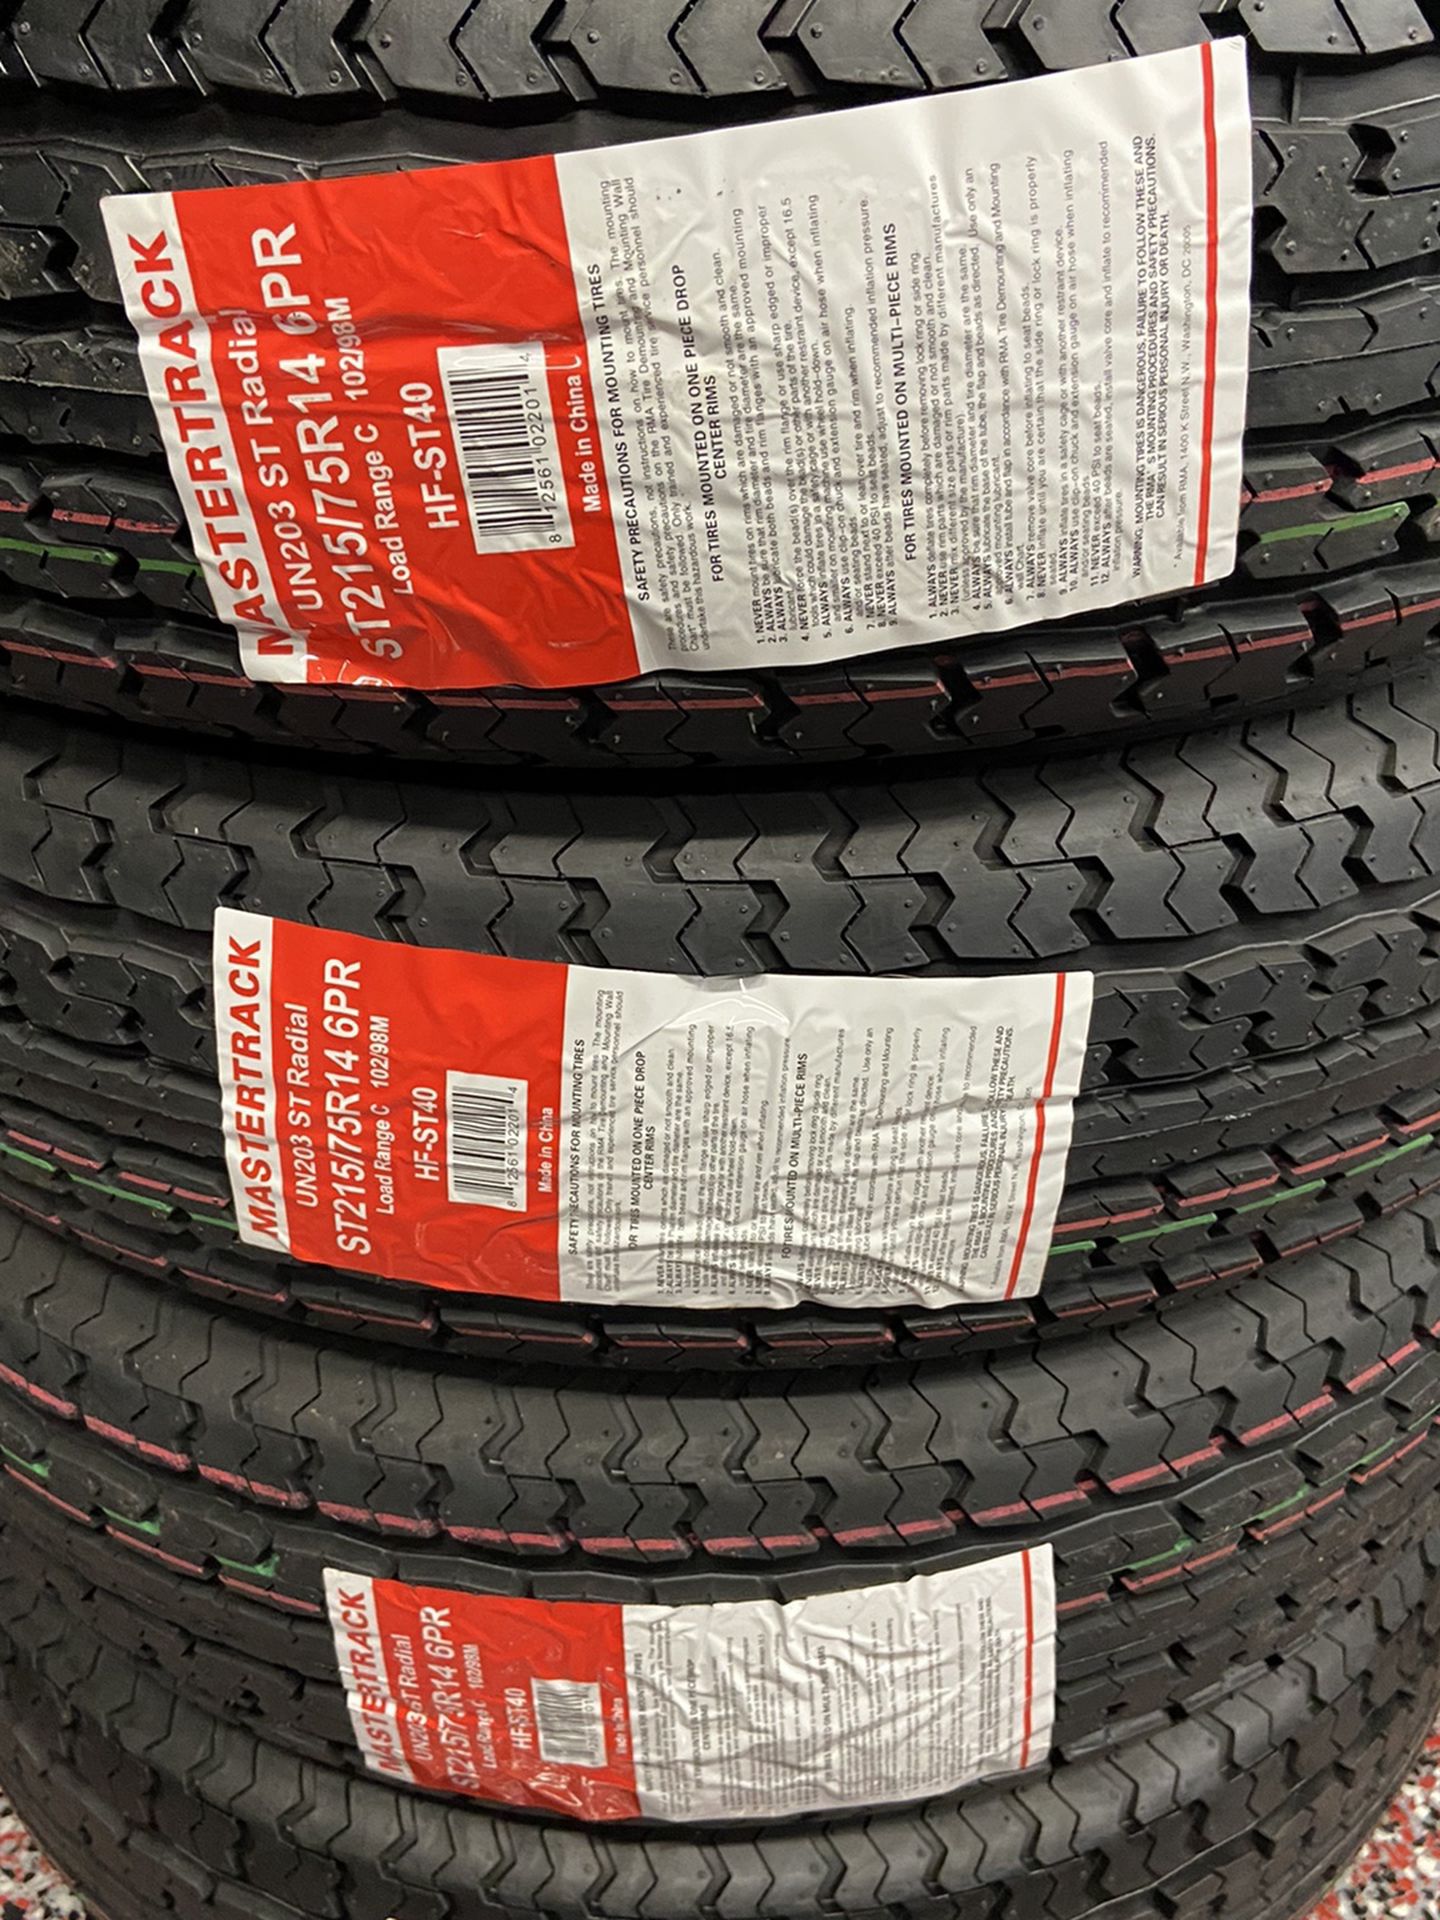 MASTER TRACK ST215/75R14 $60 NEW 6ply 215/75/14 TRAILER TIRES 215/75R/14 6 PLY